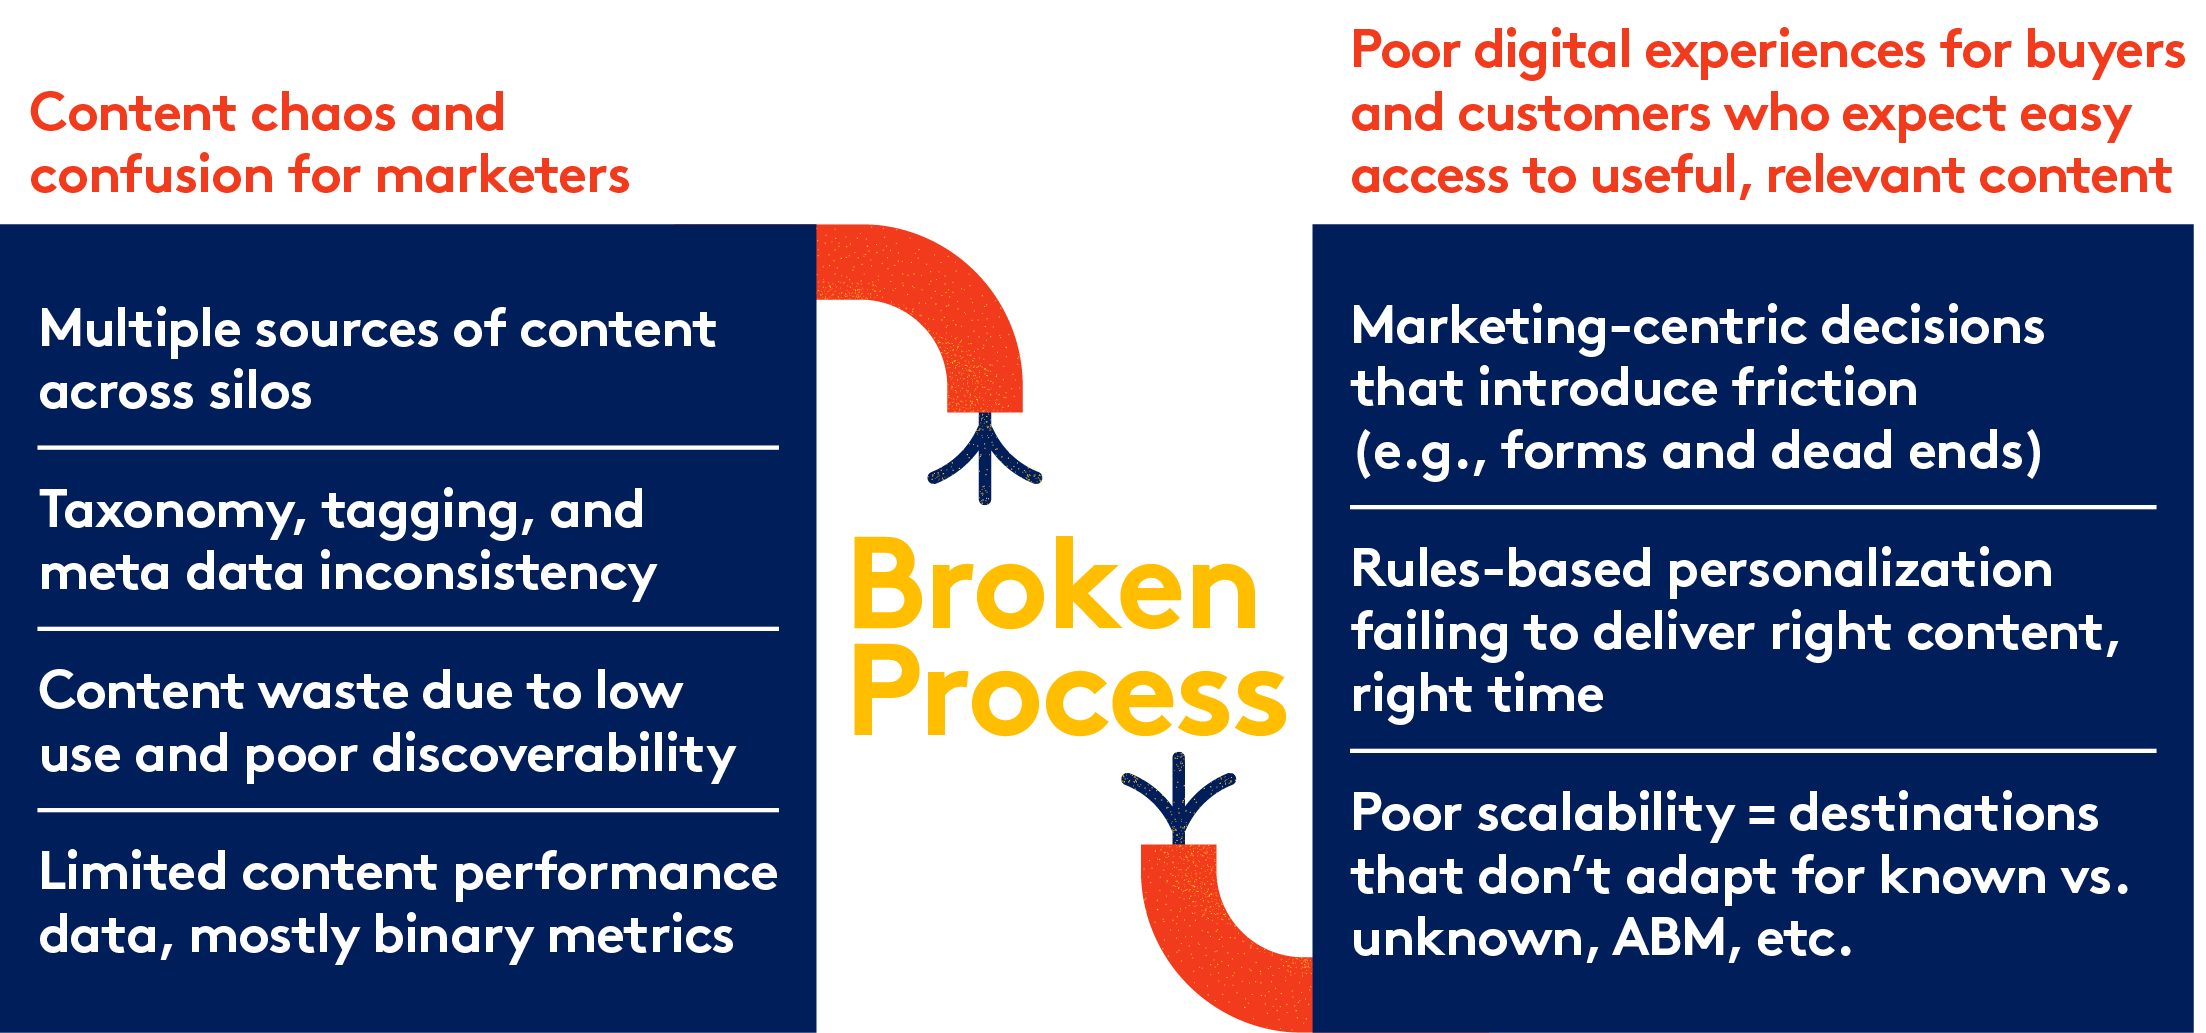 Chart illustrating the outcome of broken process behind B2B content: Chaos and confusion for marketers, poor digital experiences for buyers.